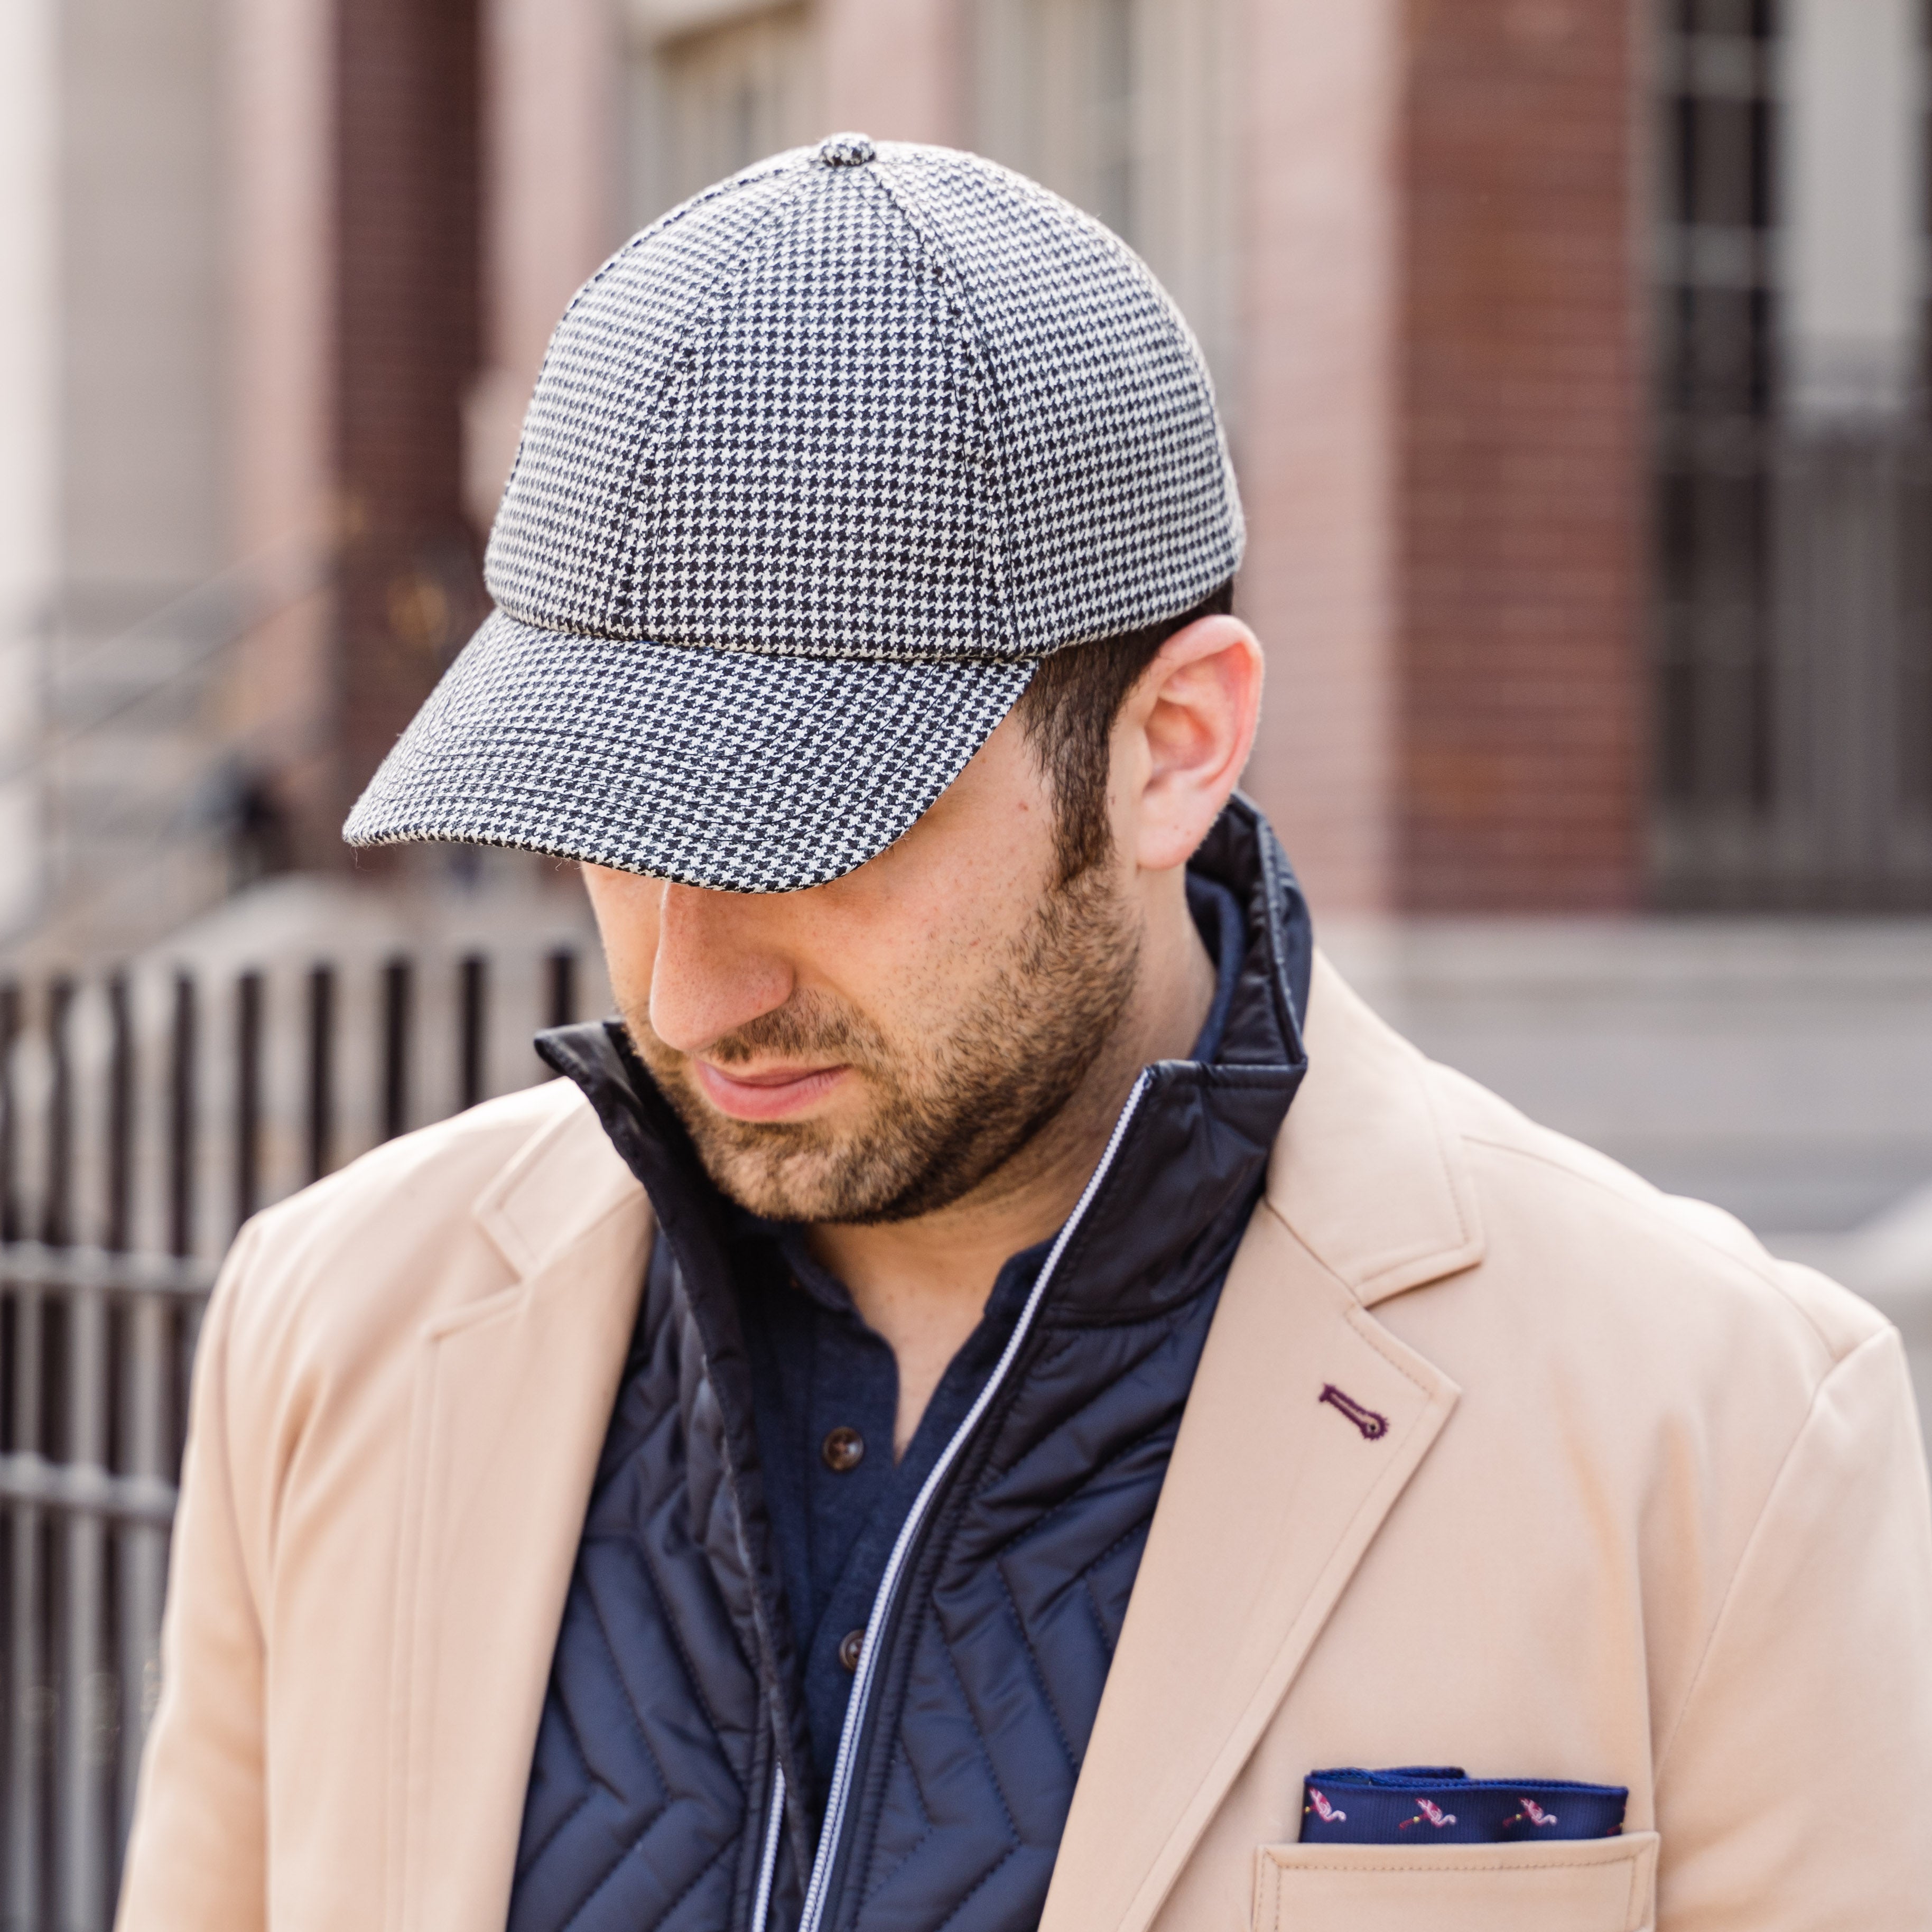 Vandre 100% Wool Houndstooth hat styled casually